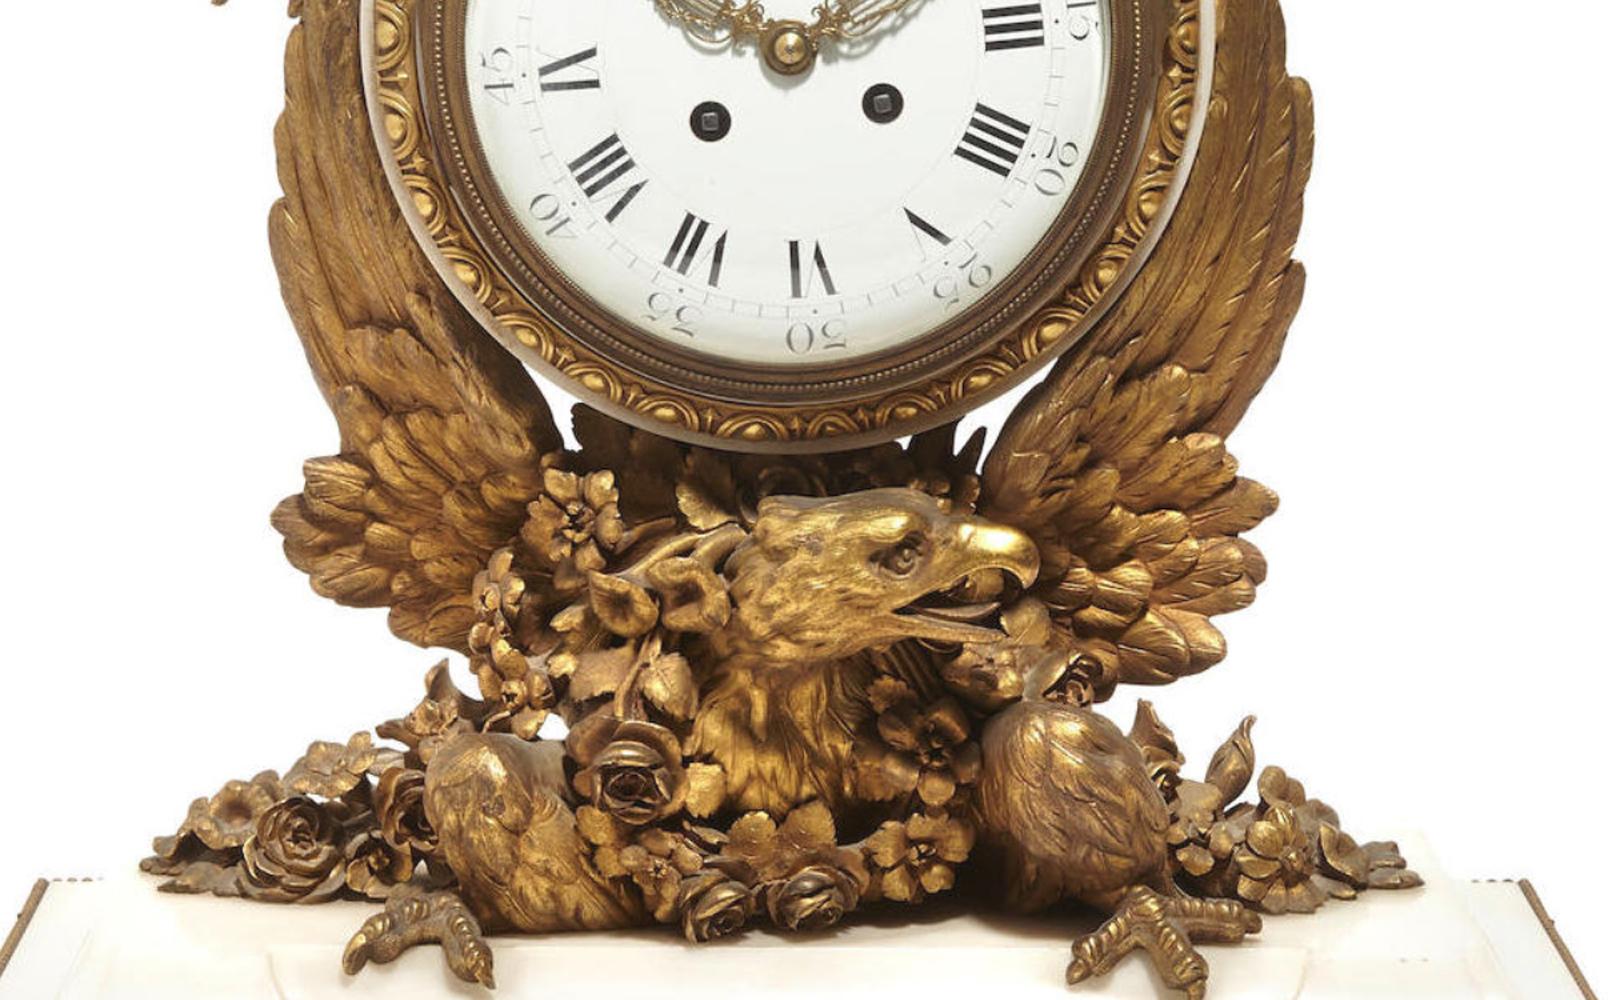 Spectacular and unique French Napoleon III ormolu mounted white marble mantel clock, 19th century.

The clock is surmounted by a gilt bronze pineapple finial with ribbons over a porcelain clock face with Roman Numerals enclosed into an ormolu egg